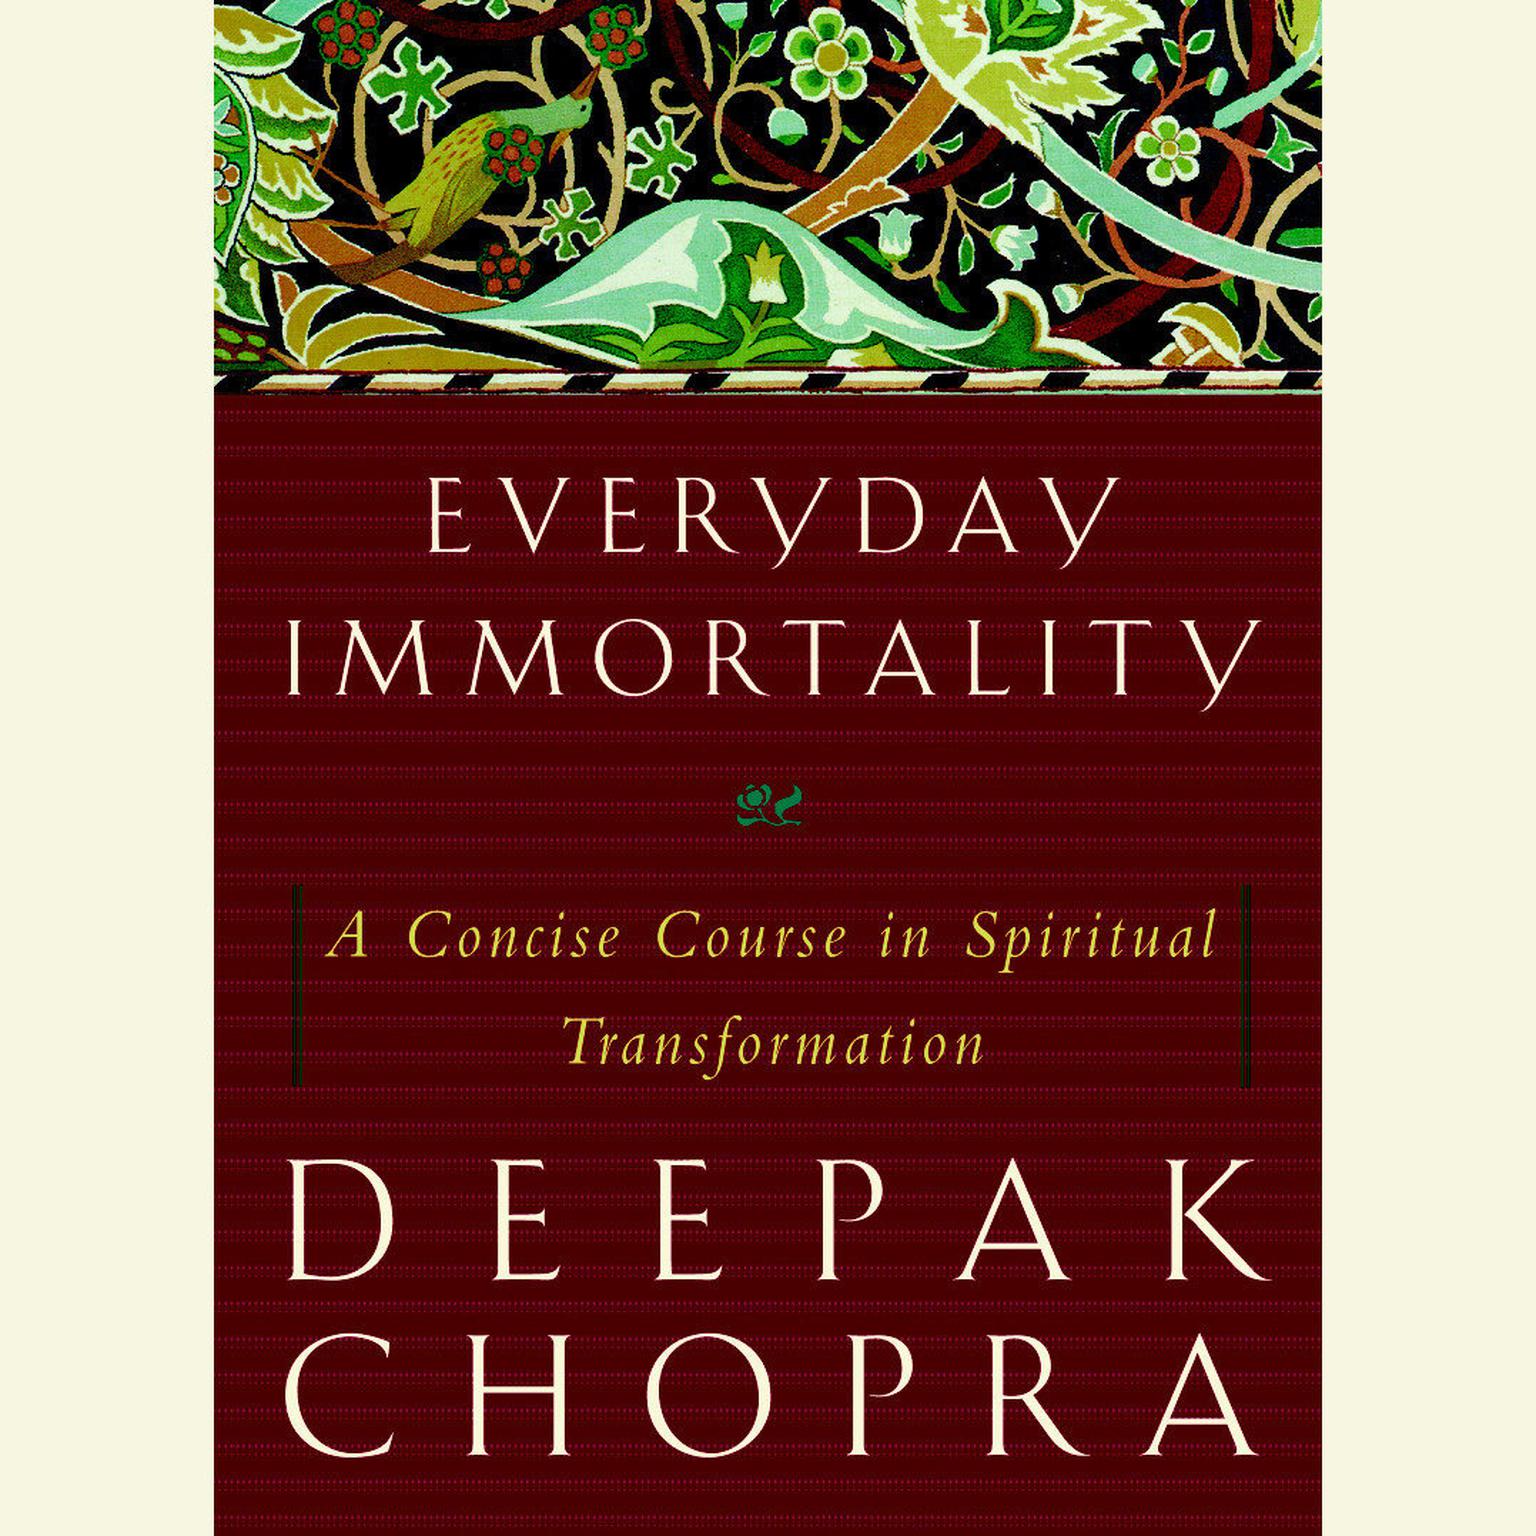 Everyday Immortality (Abridged): A Concise Course in Spiritual Transformation Audiobook, by Deepak Chopra